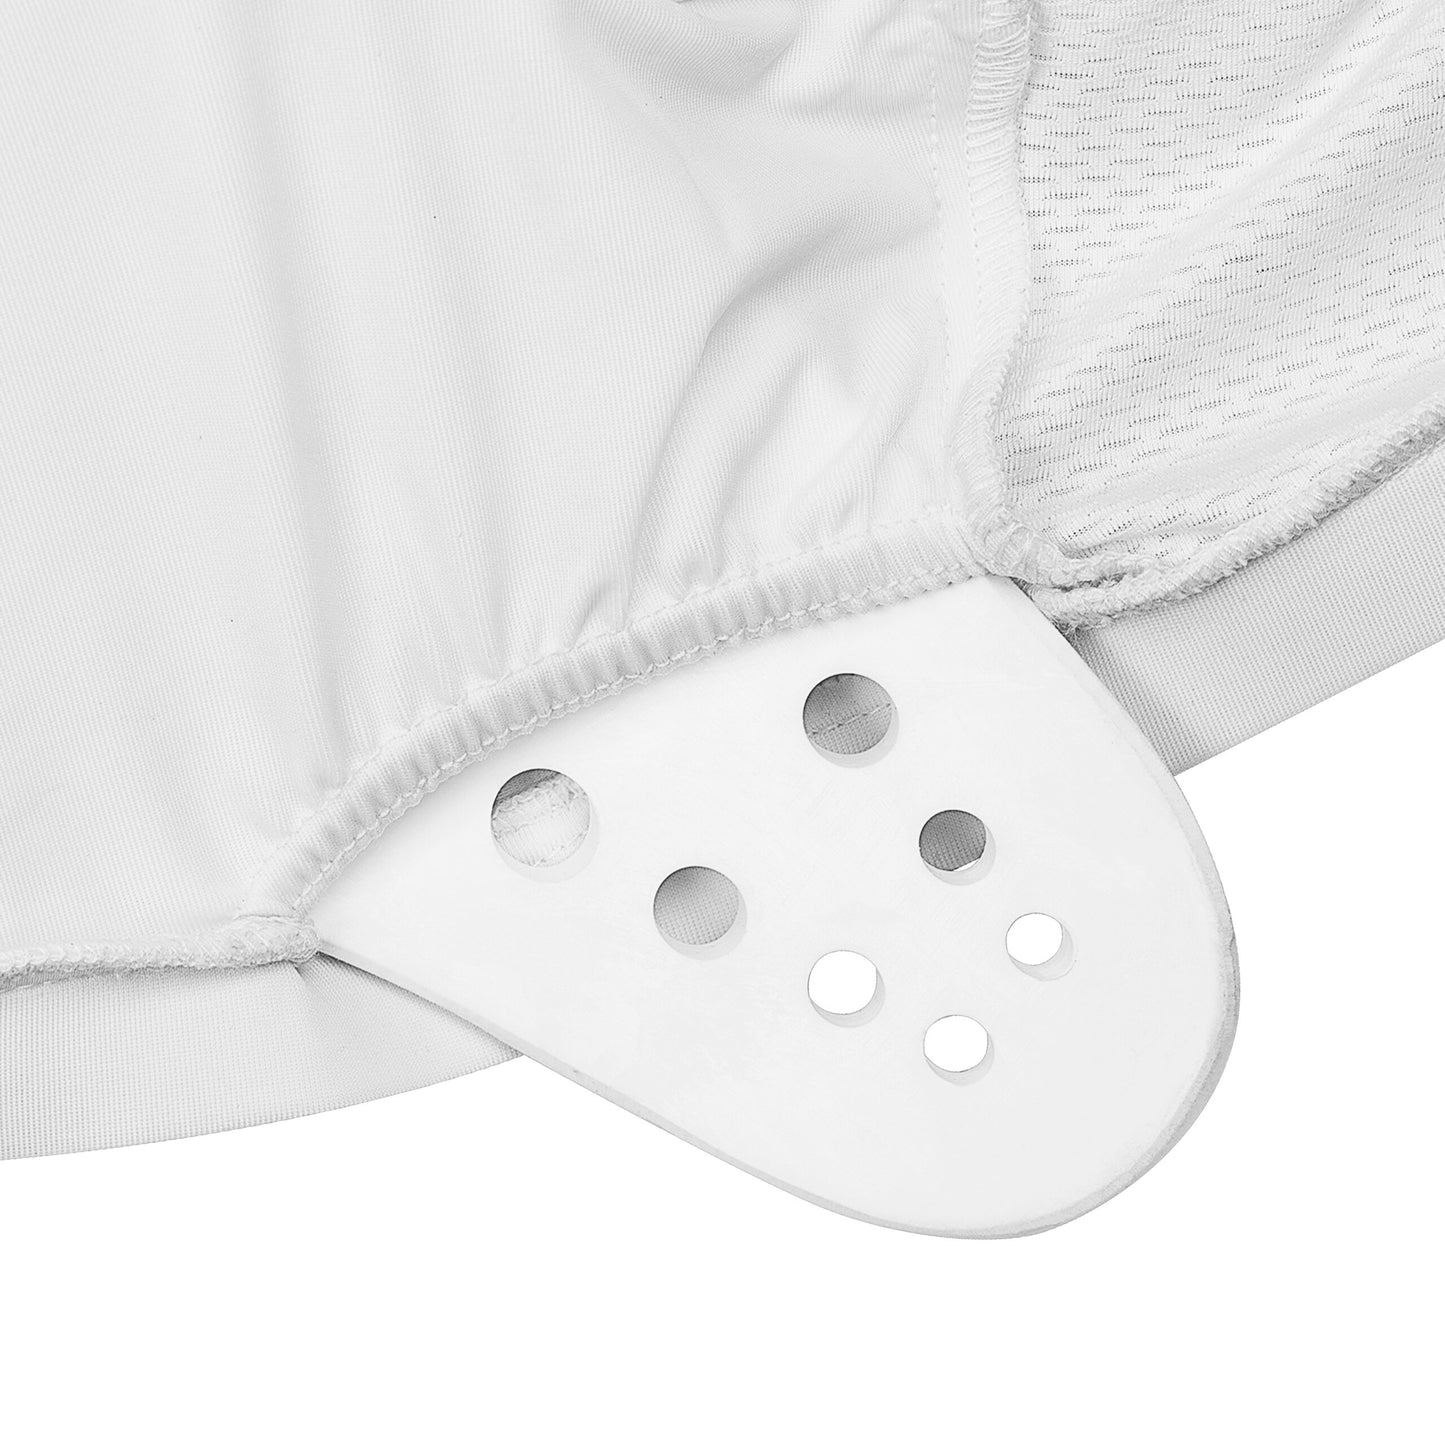 Adibp12 Adidas Wkf Approved Female Breast Protector White 07